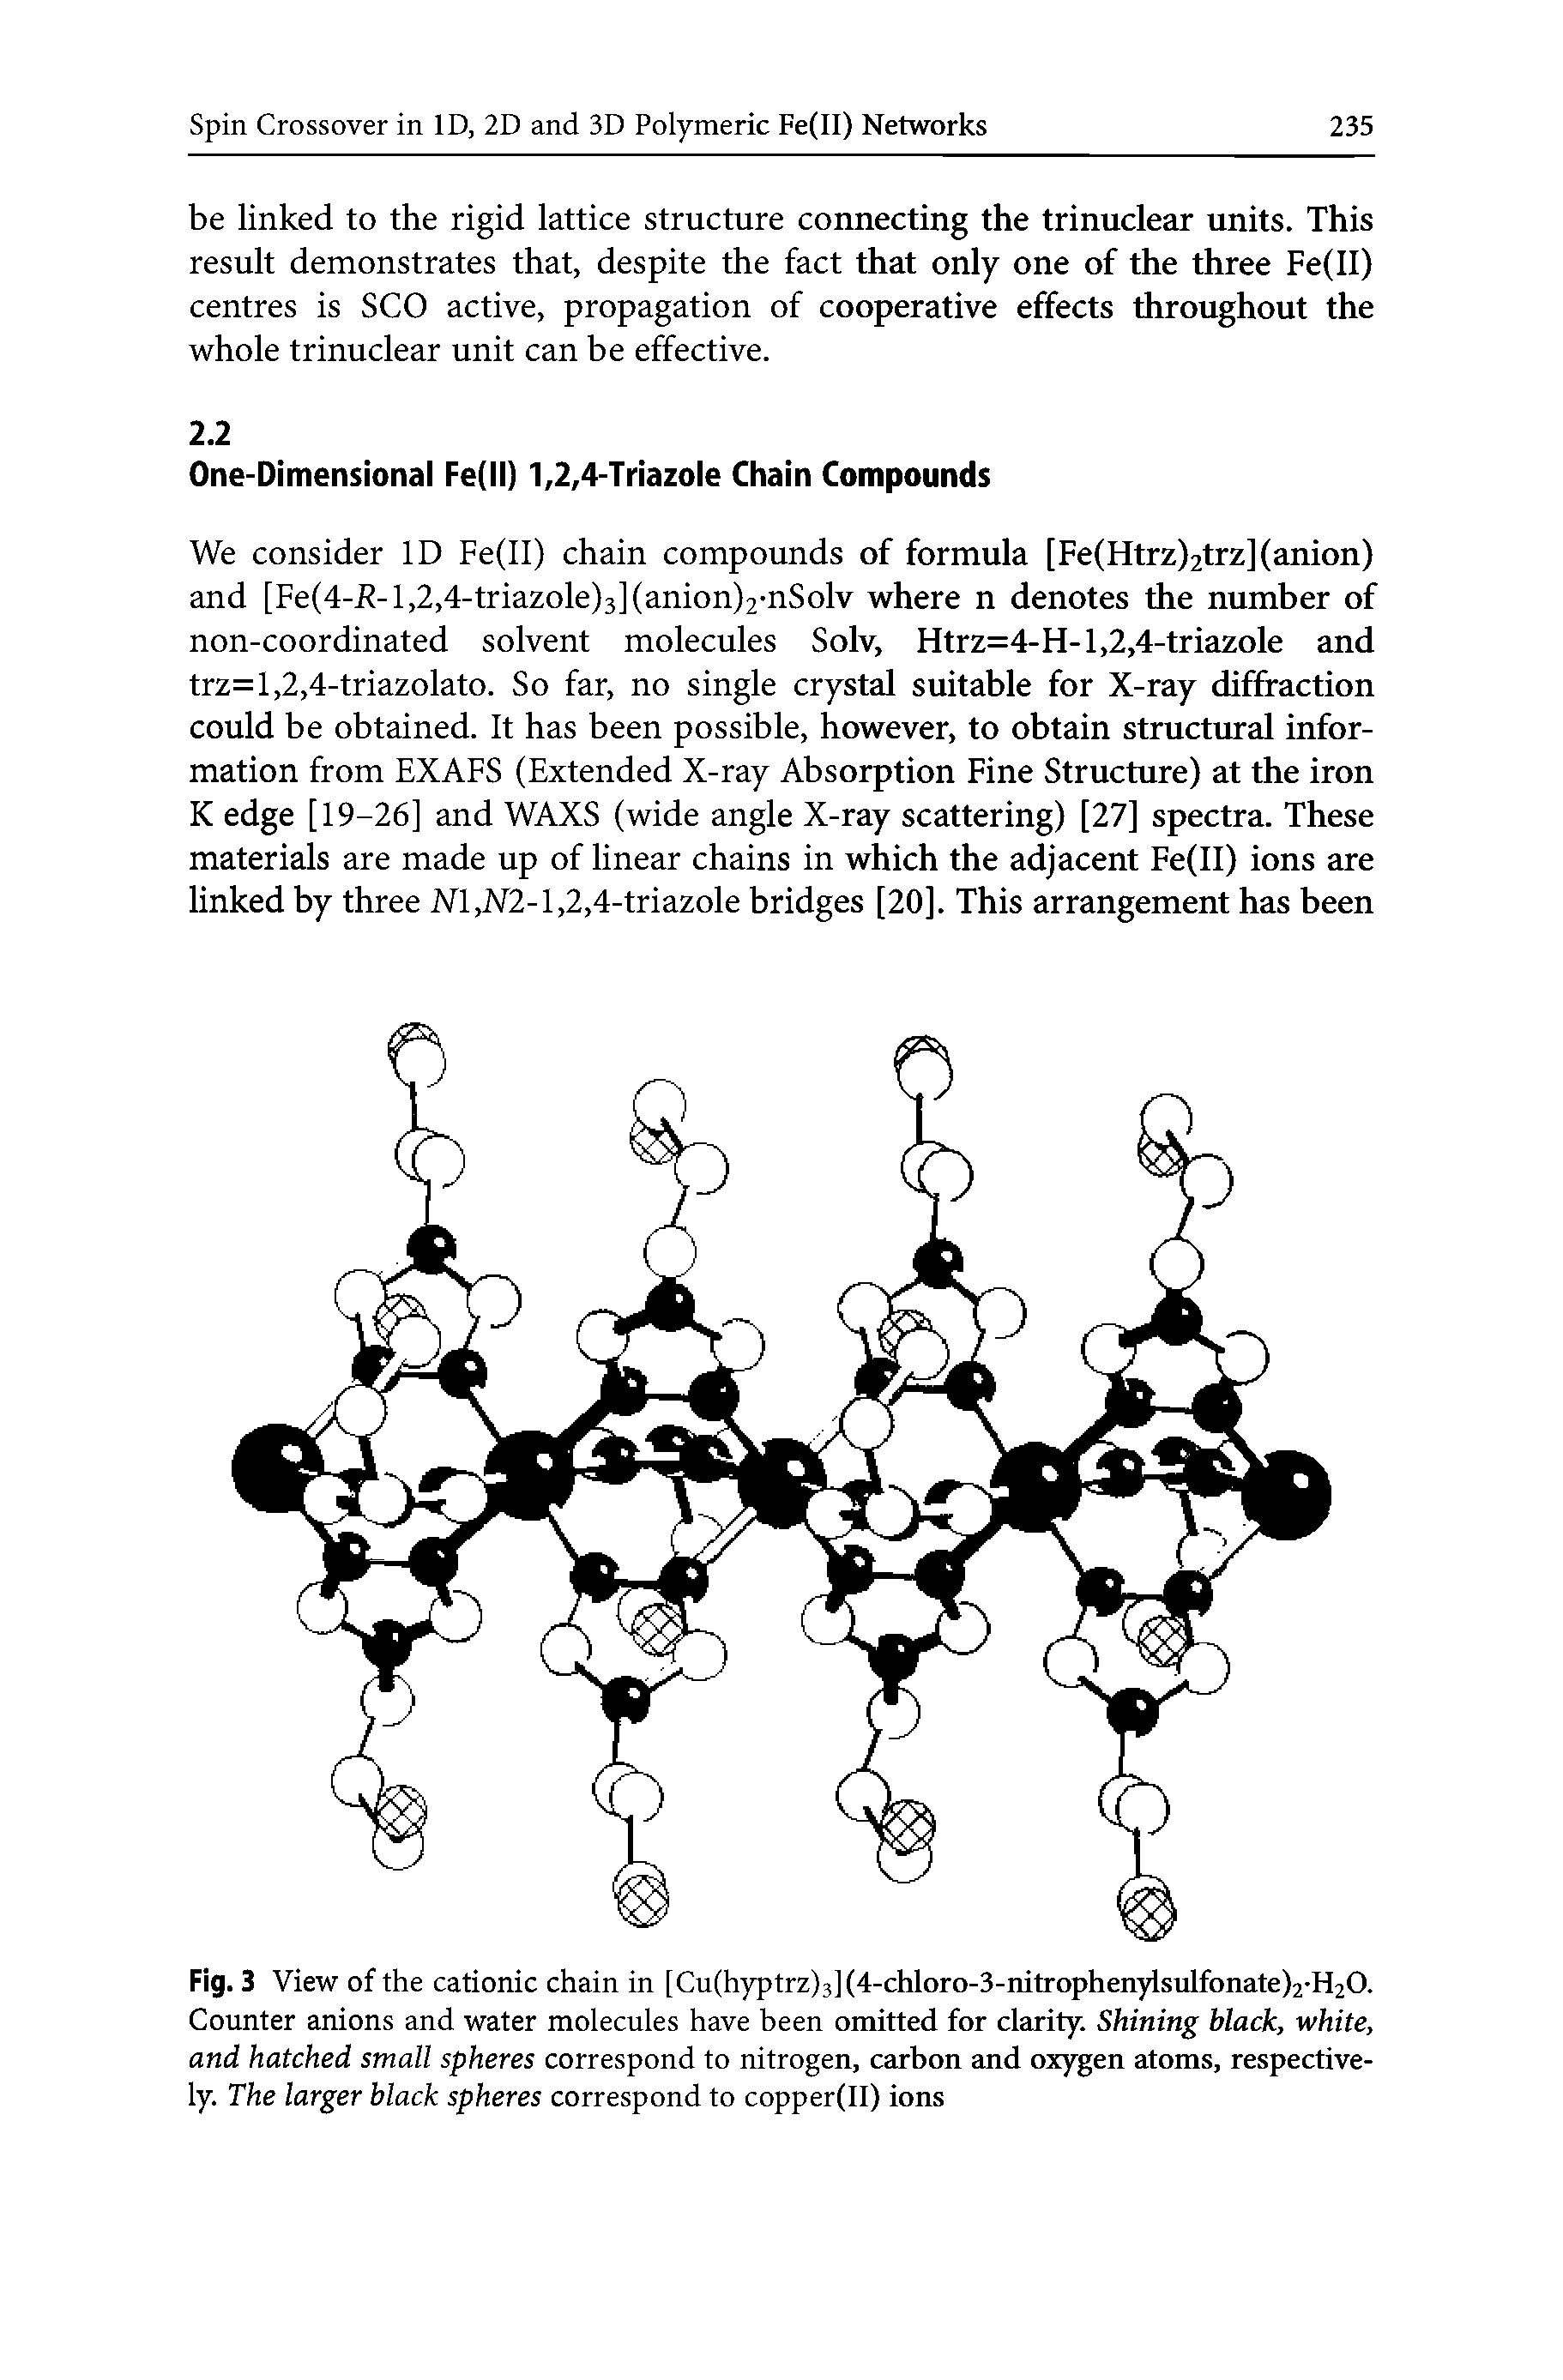 Fig. 3 View of the cationic chain in [Cu(hyptrz)3](4-chloro-3-nitrophenylsulfonate)2-H20. Counter anions and water molecules have been omitted for clarity. Shitting black, white, and hatched small spheres correspond to nitrogen, carbon and oxygen atoms, respectively. The larger black spheres correspond to copper(II) ions...